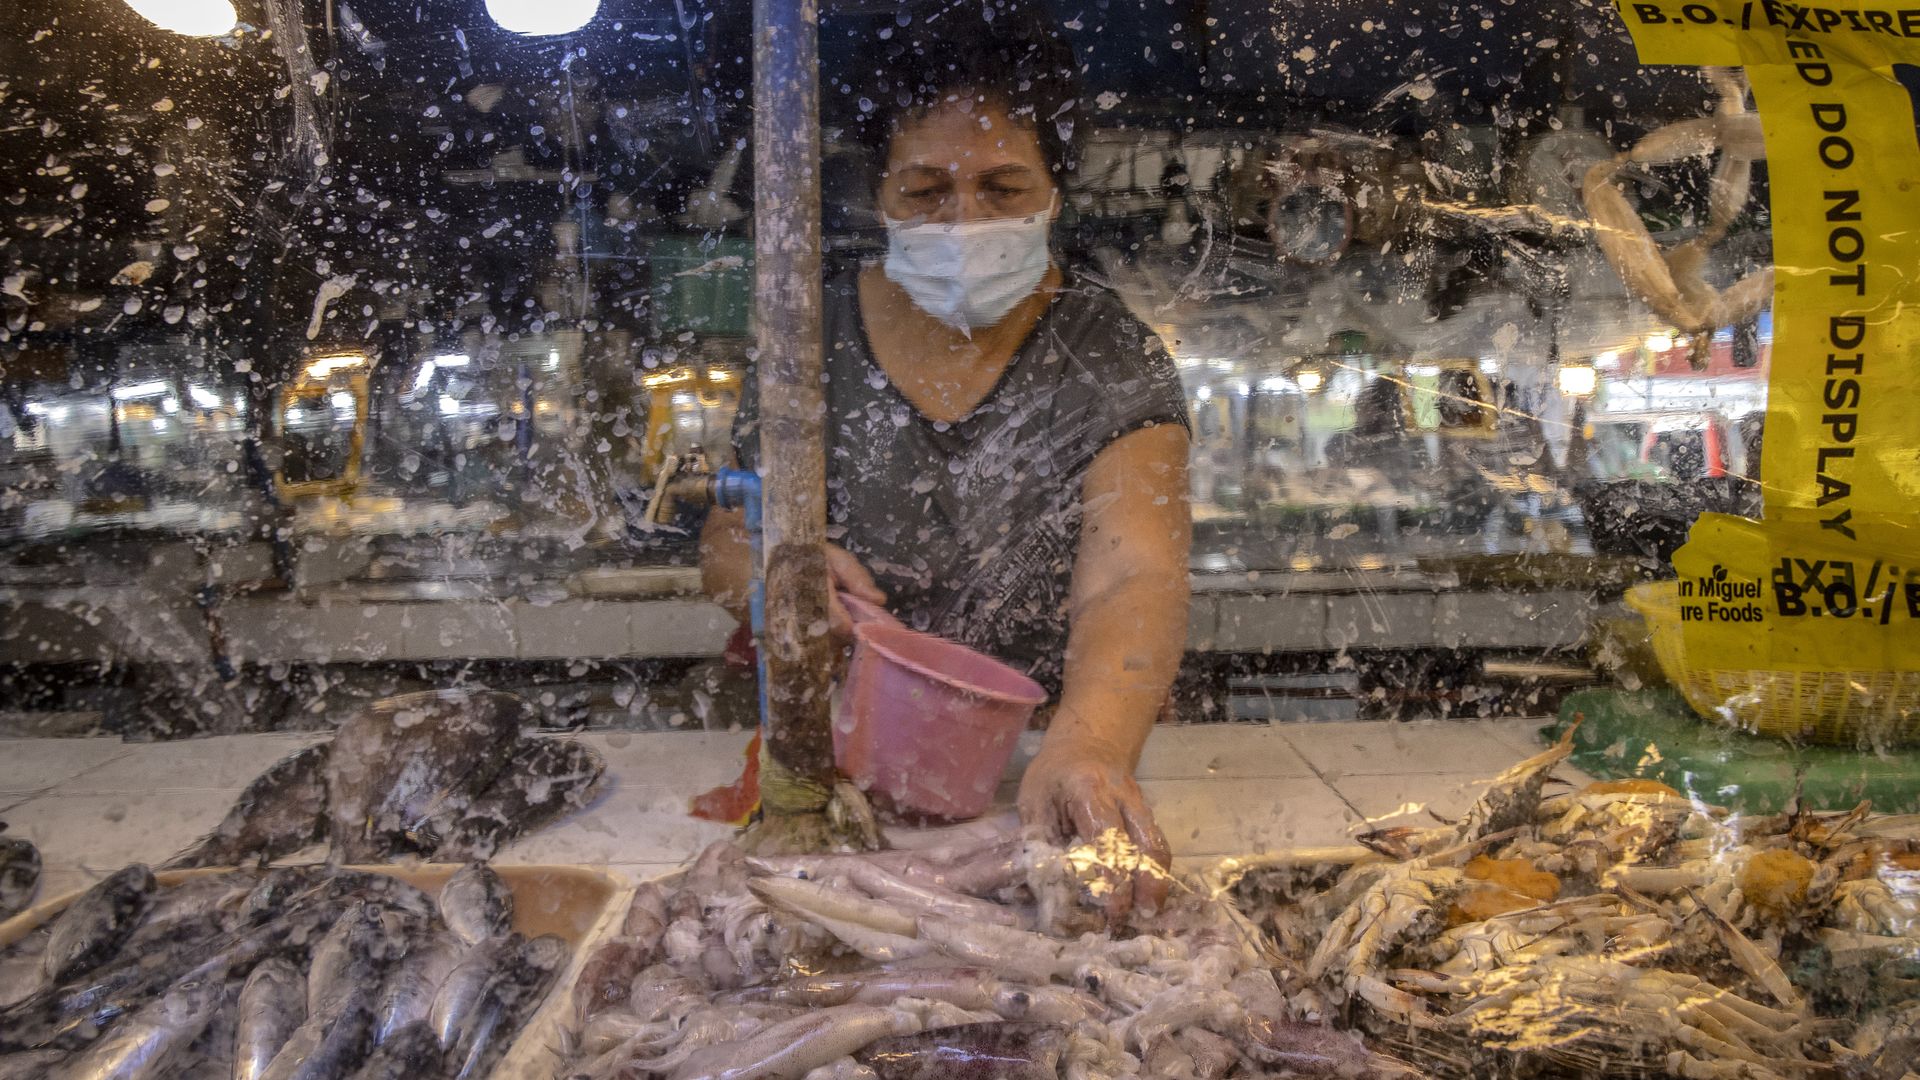 A woman at a wet market in the Philippines.